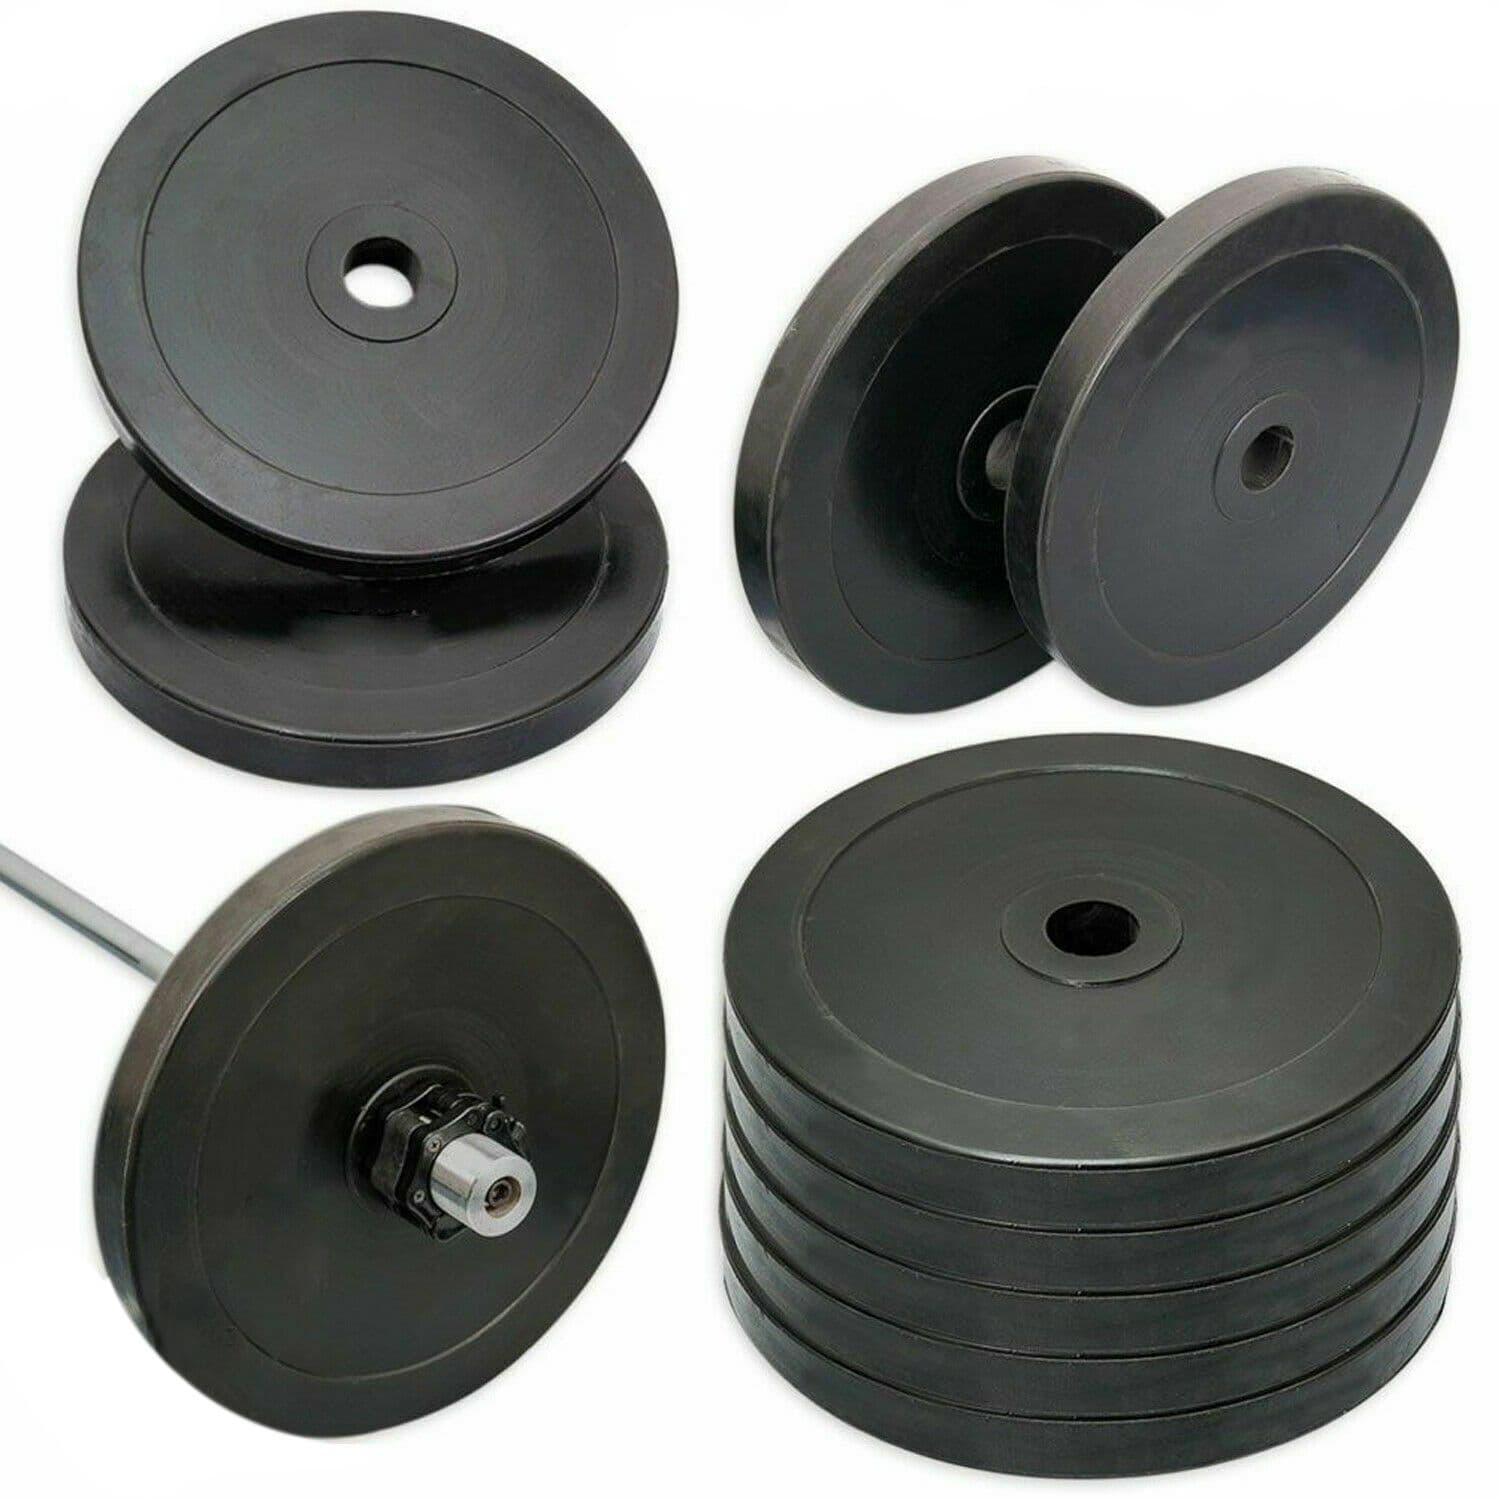 Olympic Rubber Weight Plates Set